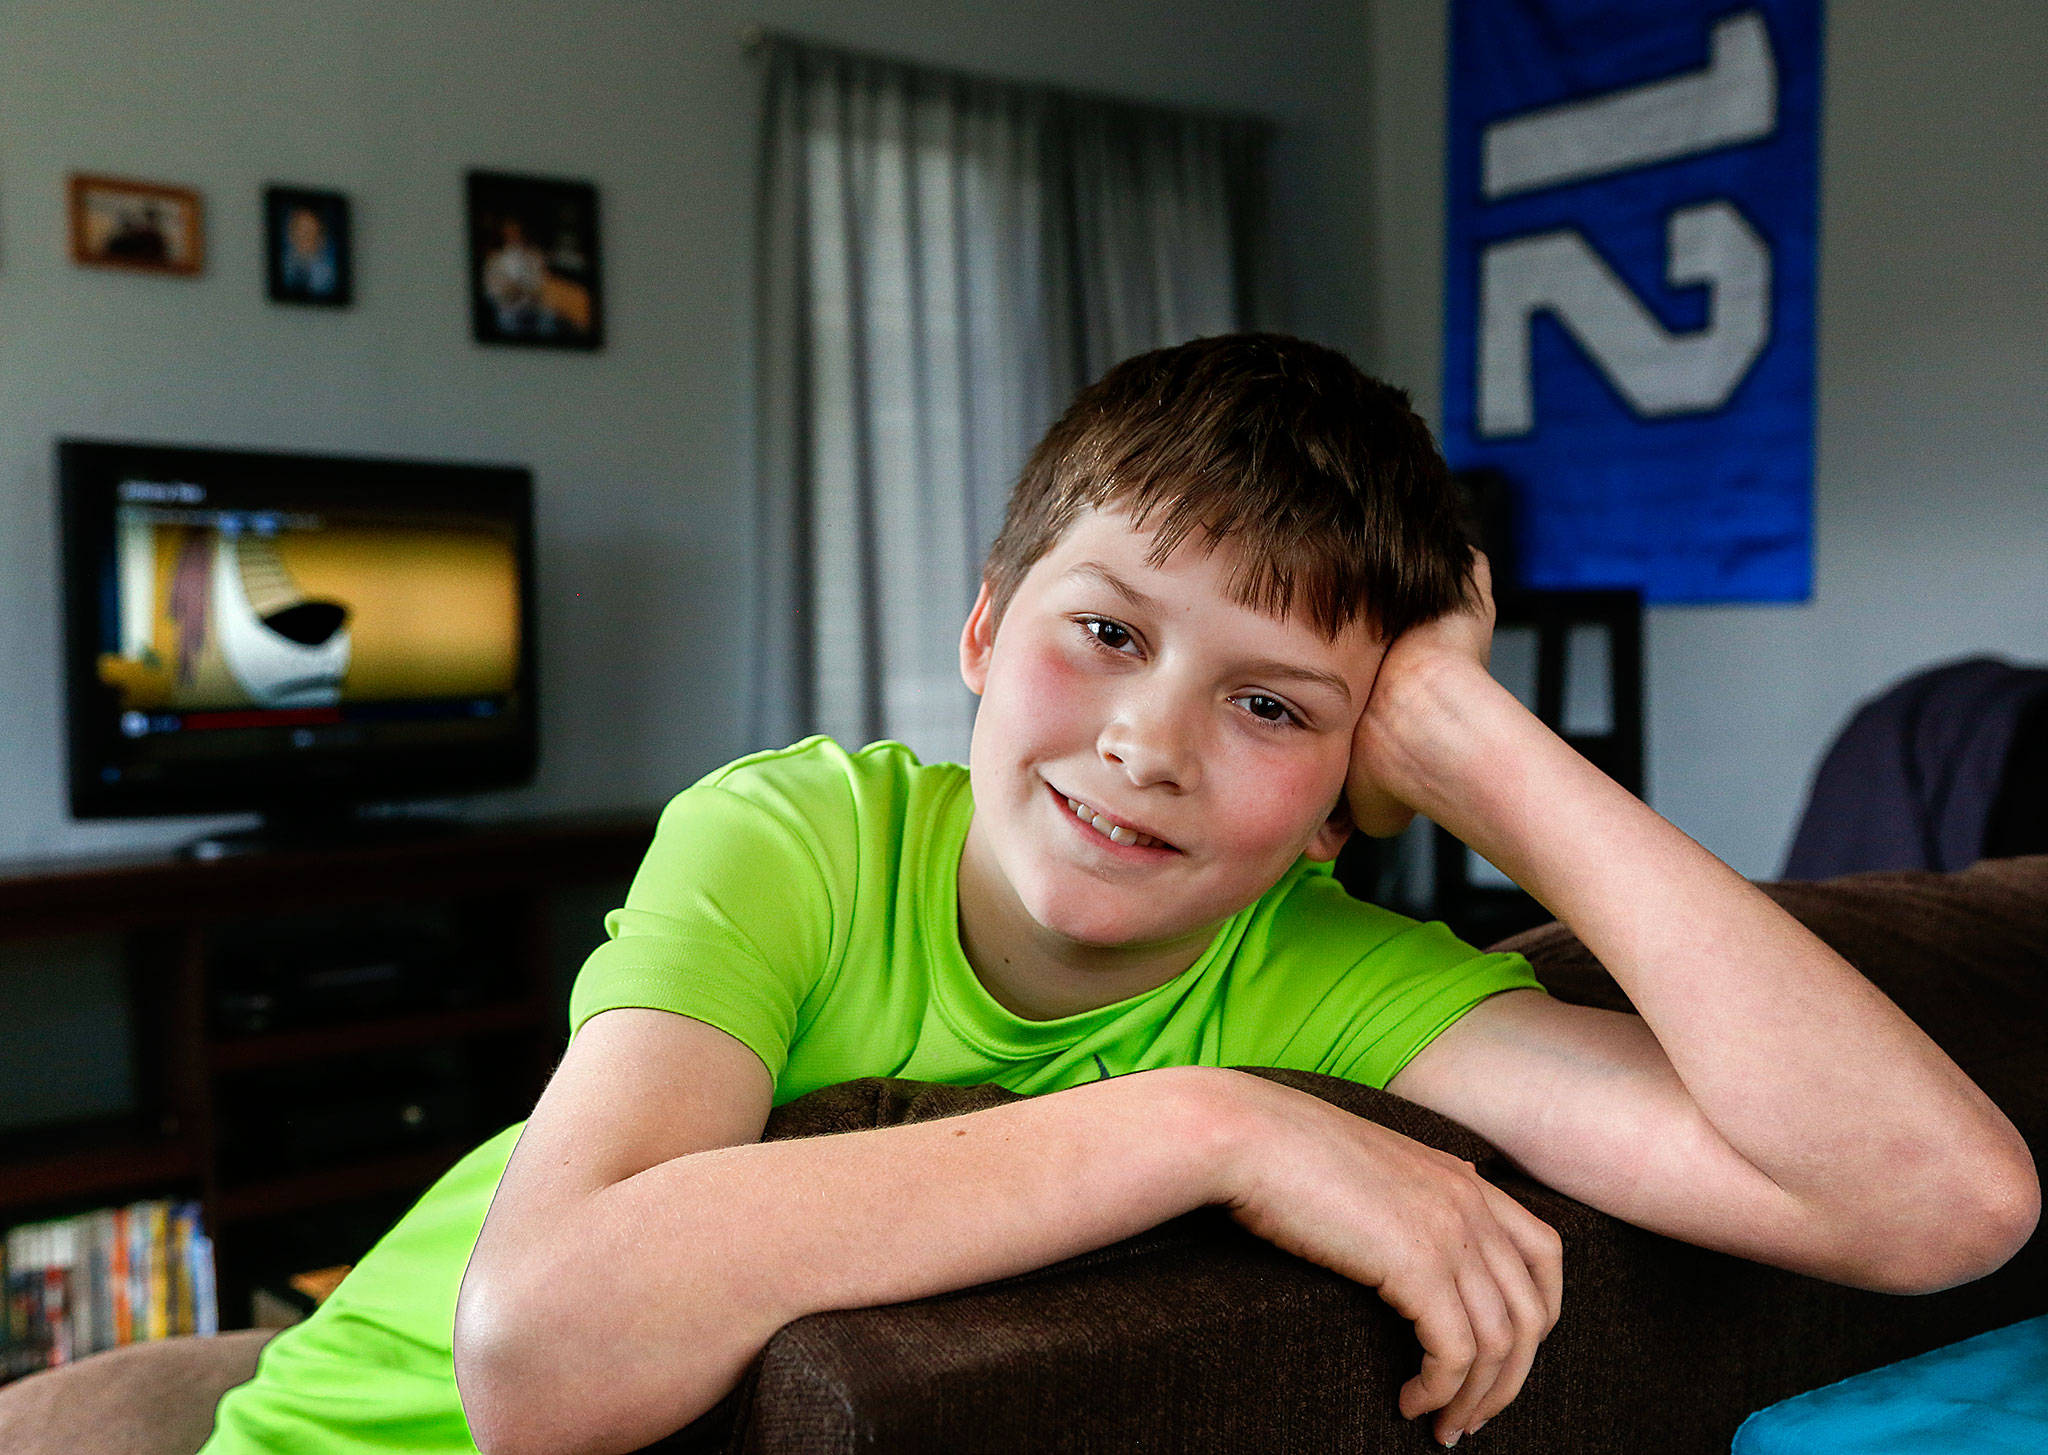 At his home in Snohomish, Jonah Urie, 11, talks about rescuing a drowning toddler this weekend at the Snohomish Aquatic Center. (Dan Bates / The Herald)